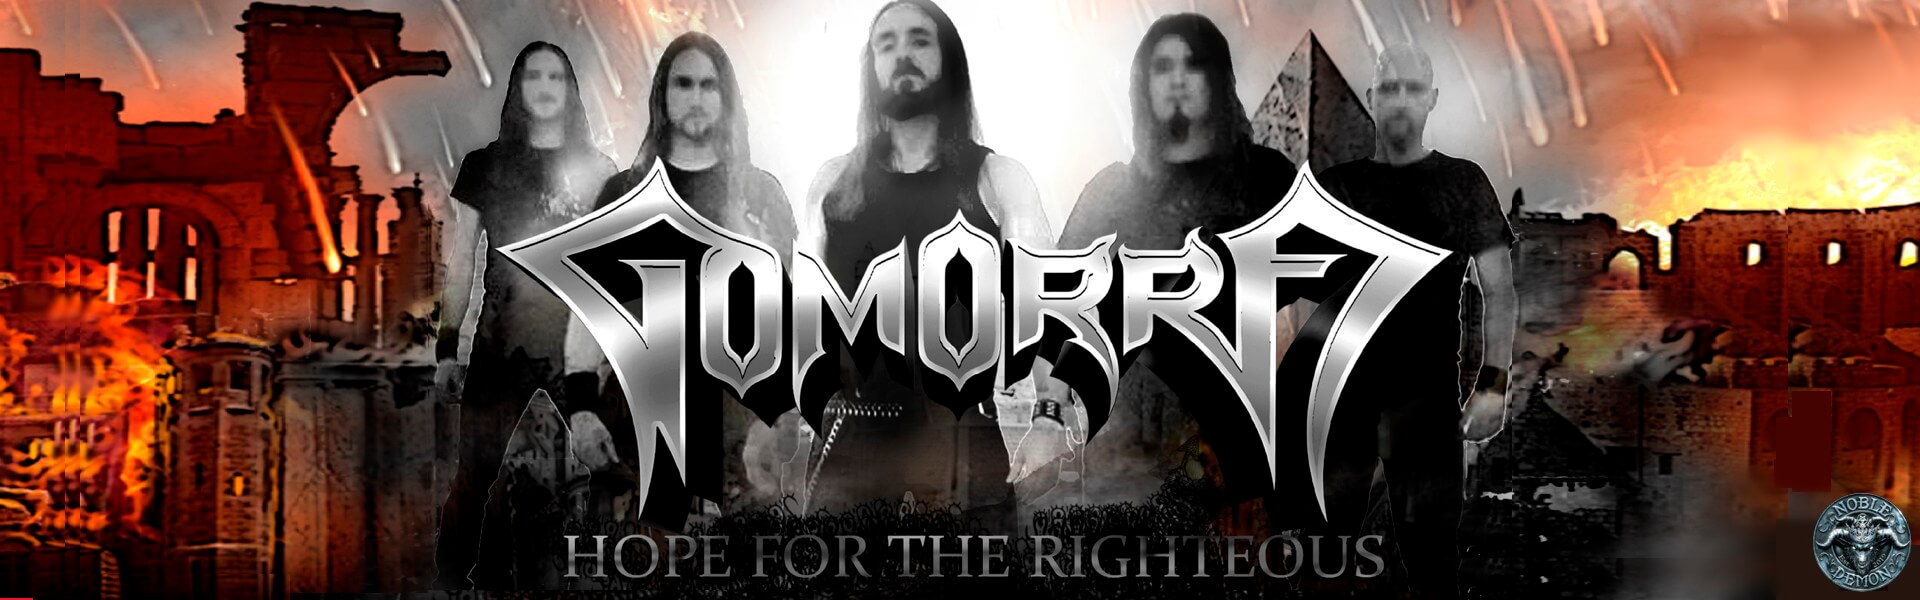 Gomorra Hope For The Righteous Noble Demon Available Today Ucm One